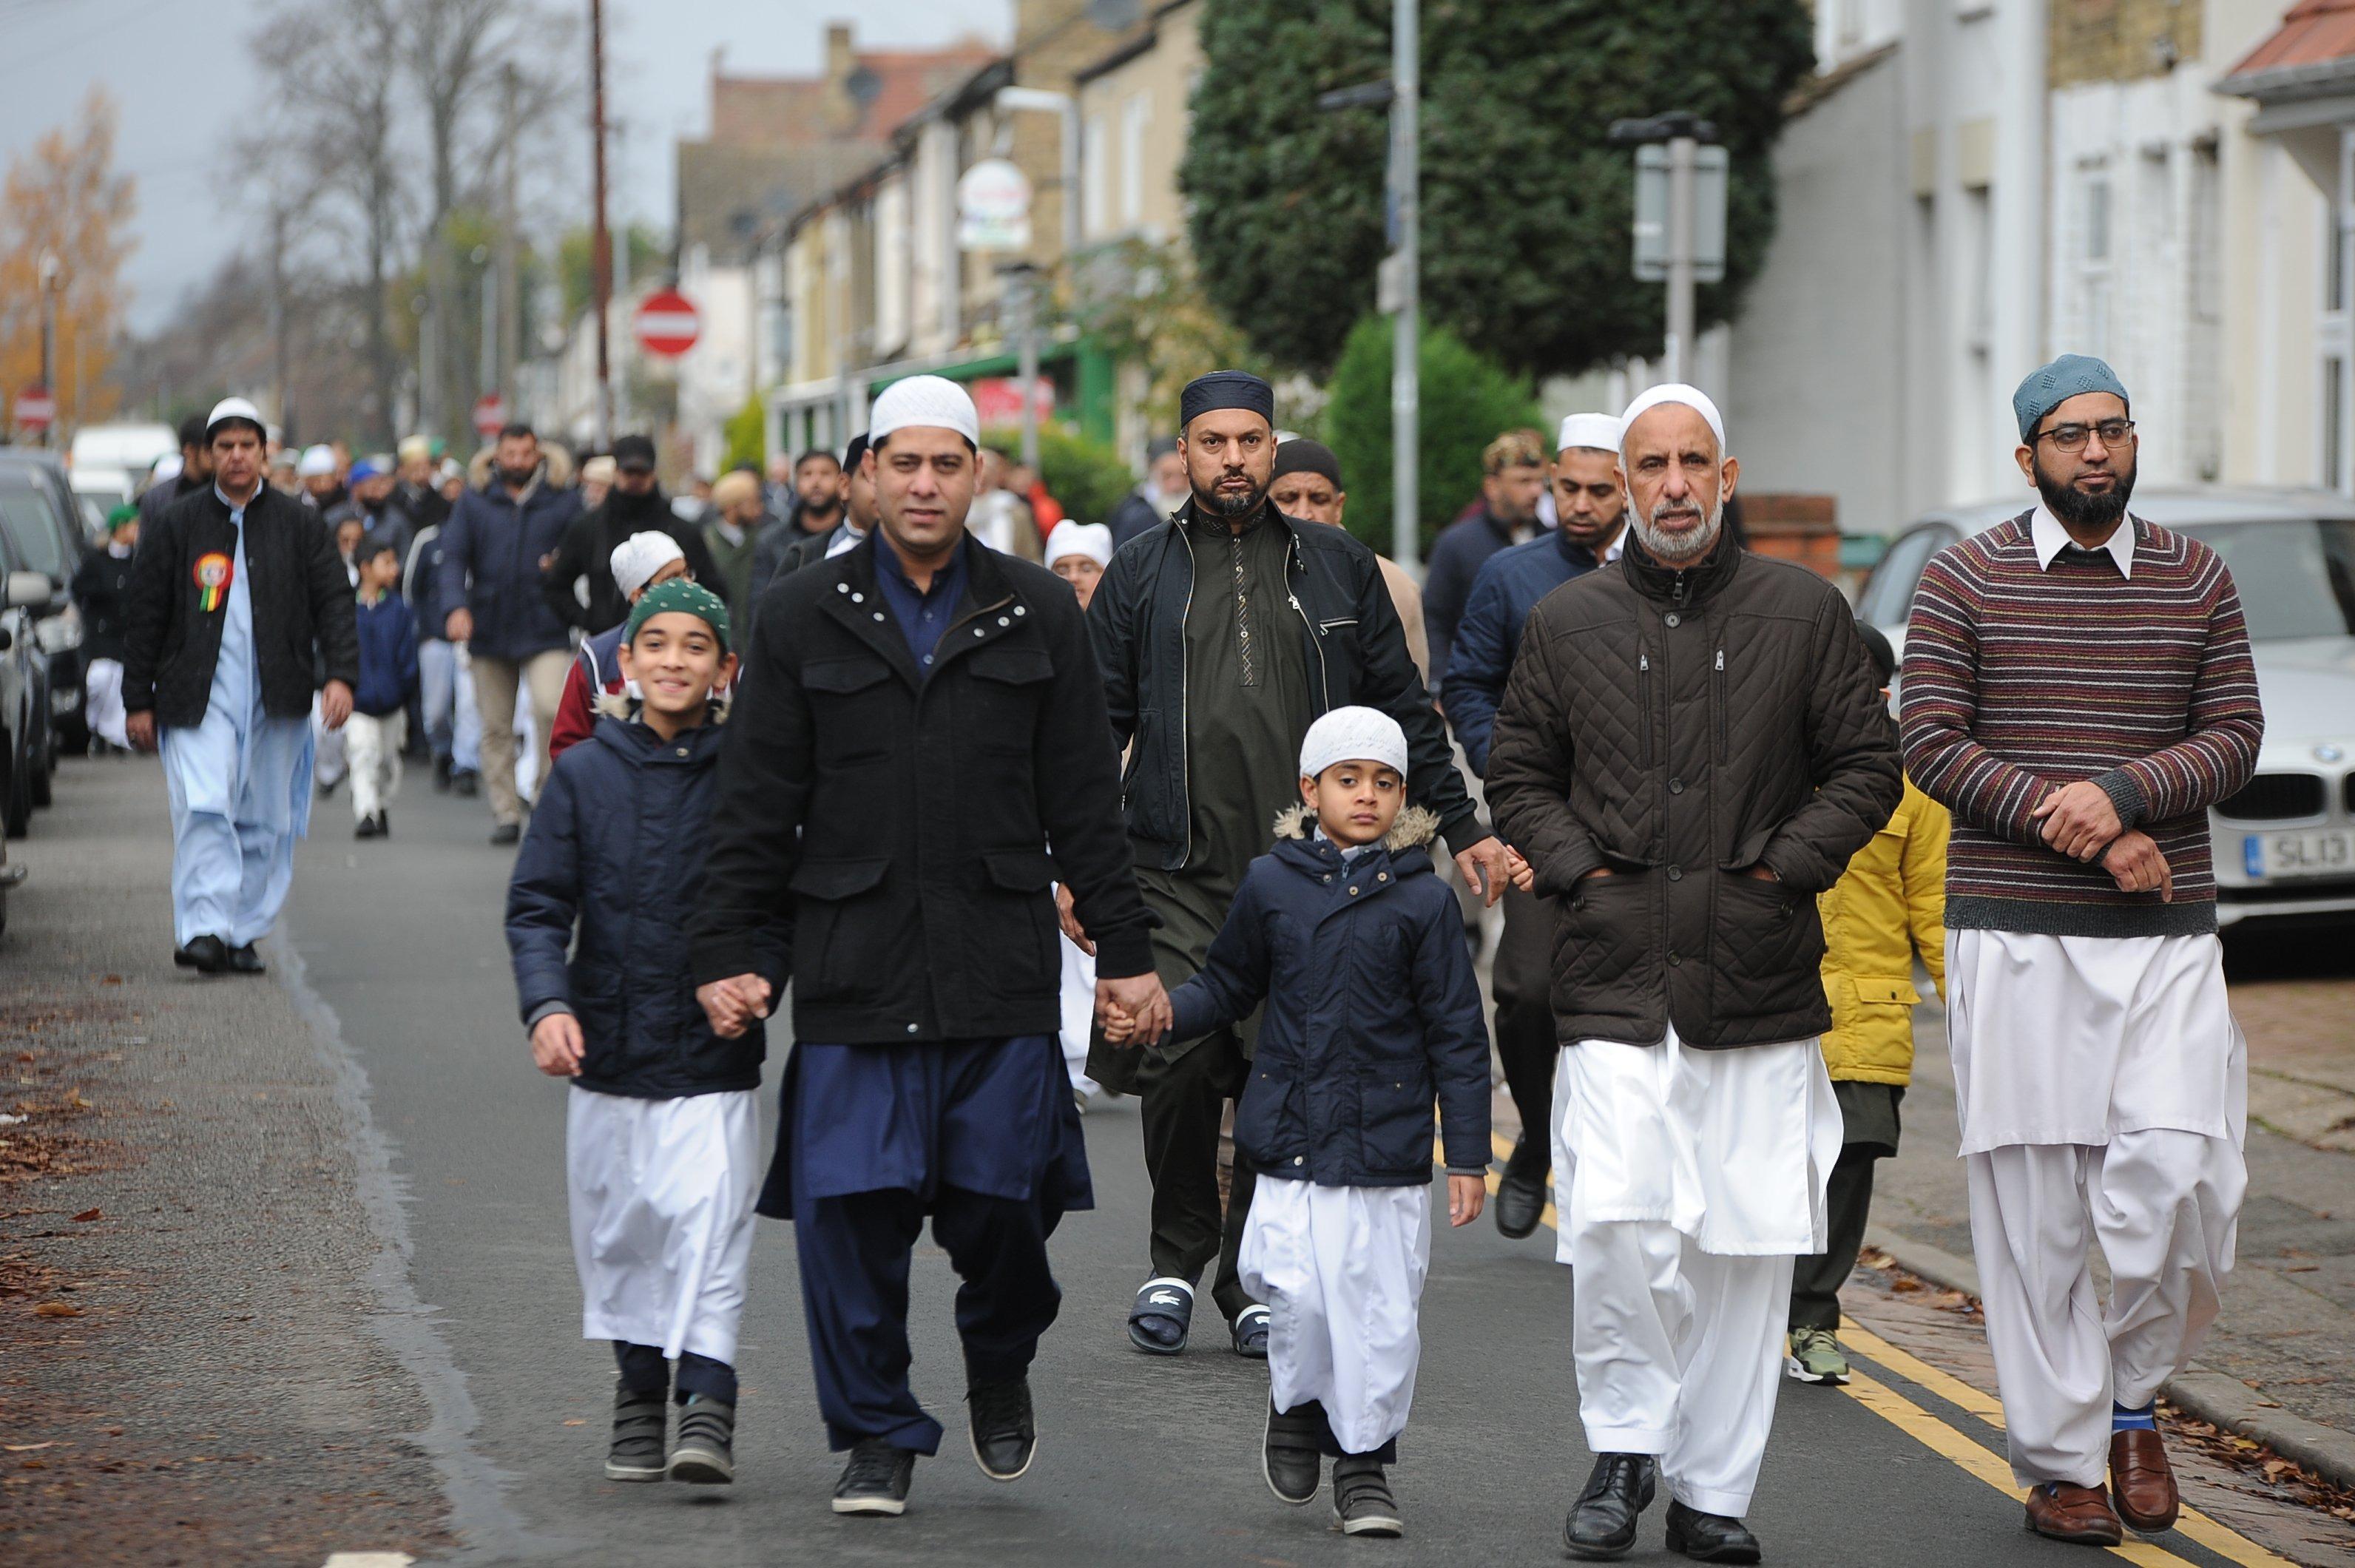 The march to celebrate the birthday of the Prophet Muhammad (Milaad Un Nabi)  from  Masjid Ghousia mosque to  Faizan-E-Madina mosque in Peterborough EMN-191117-155032009